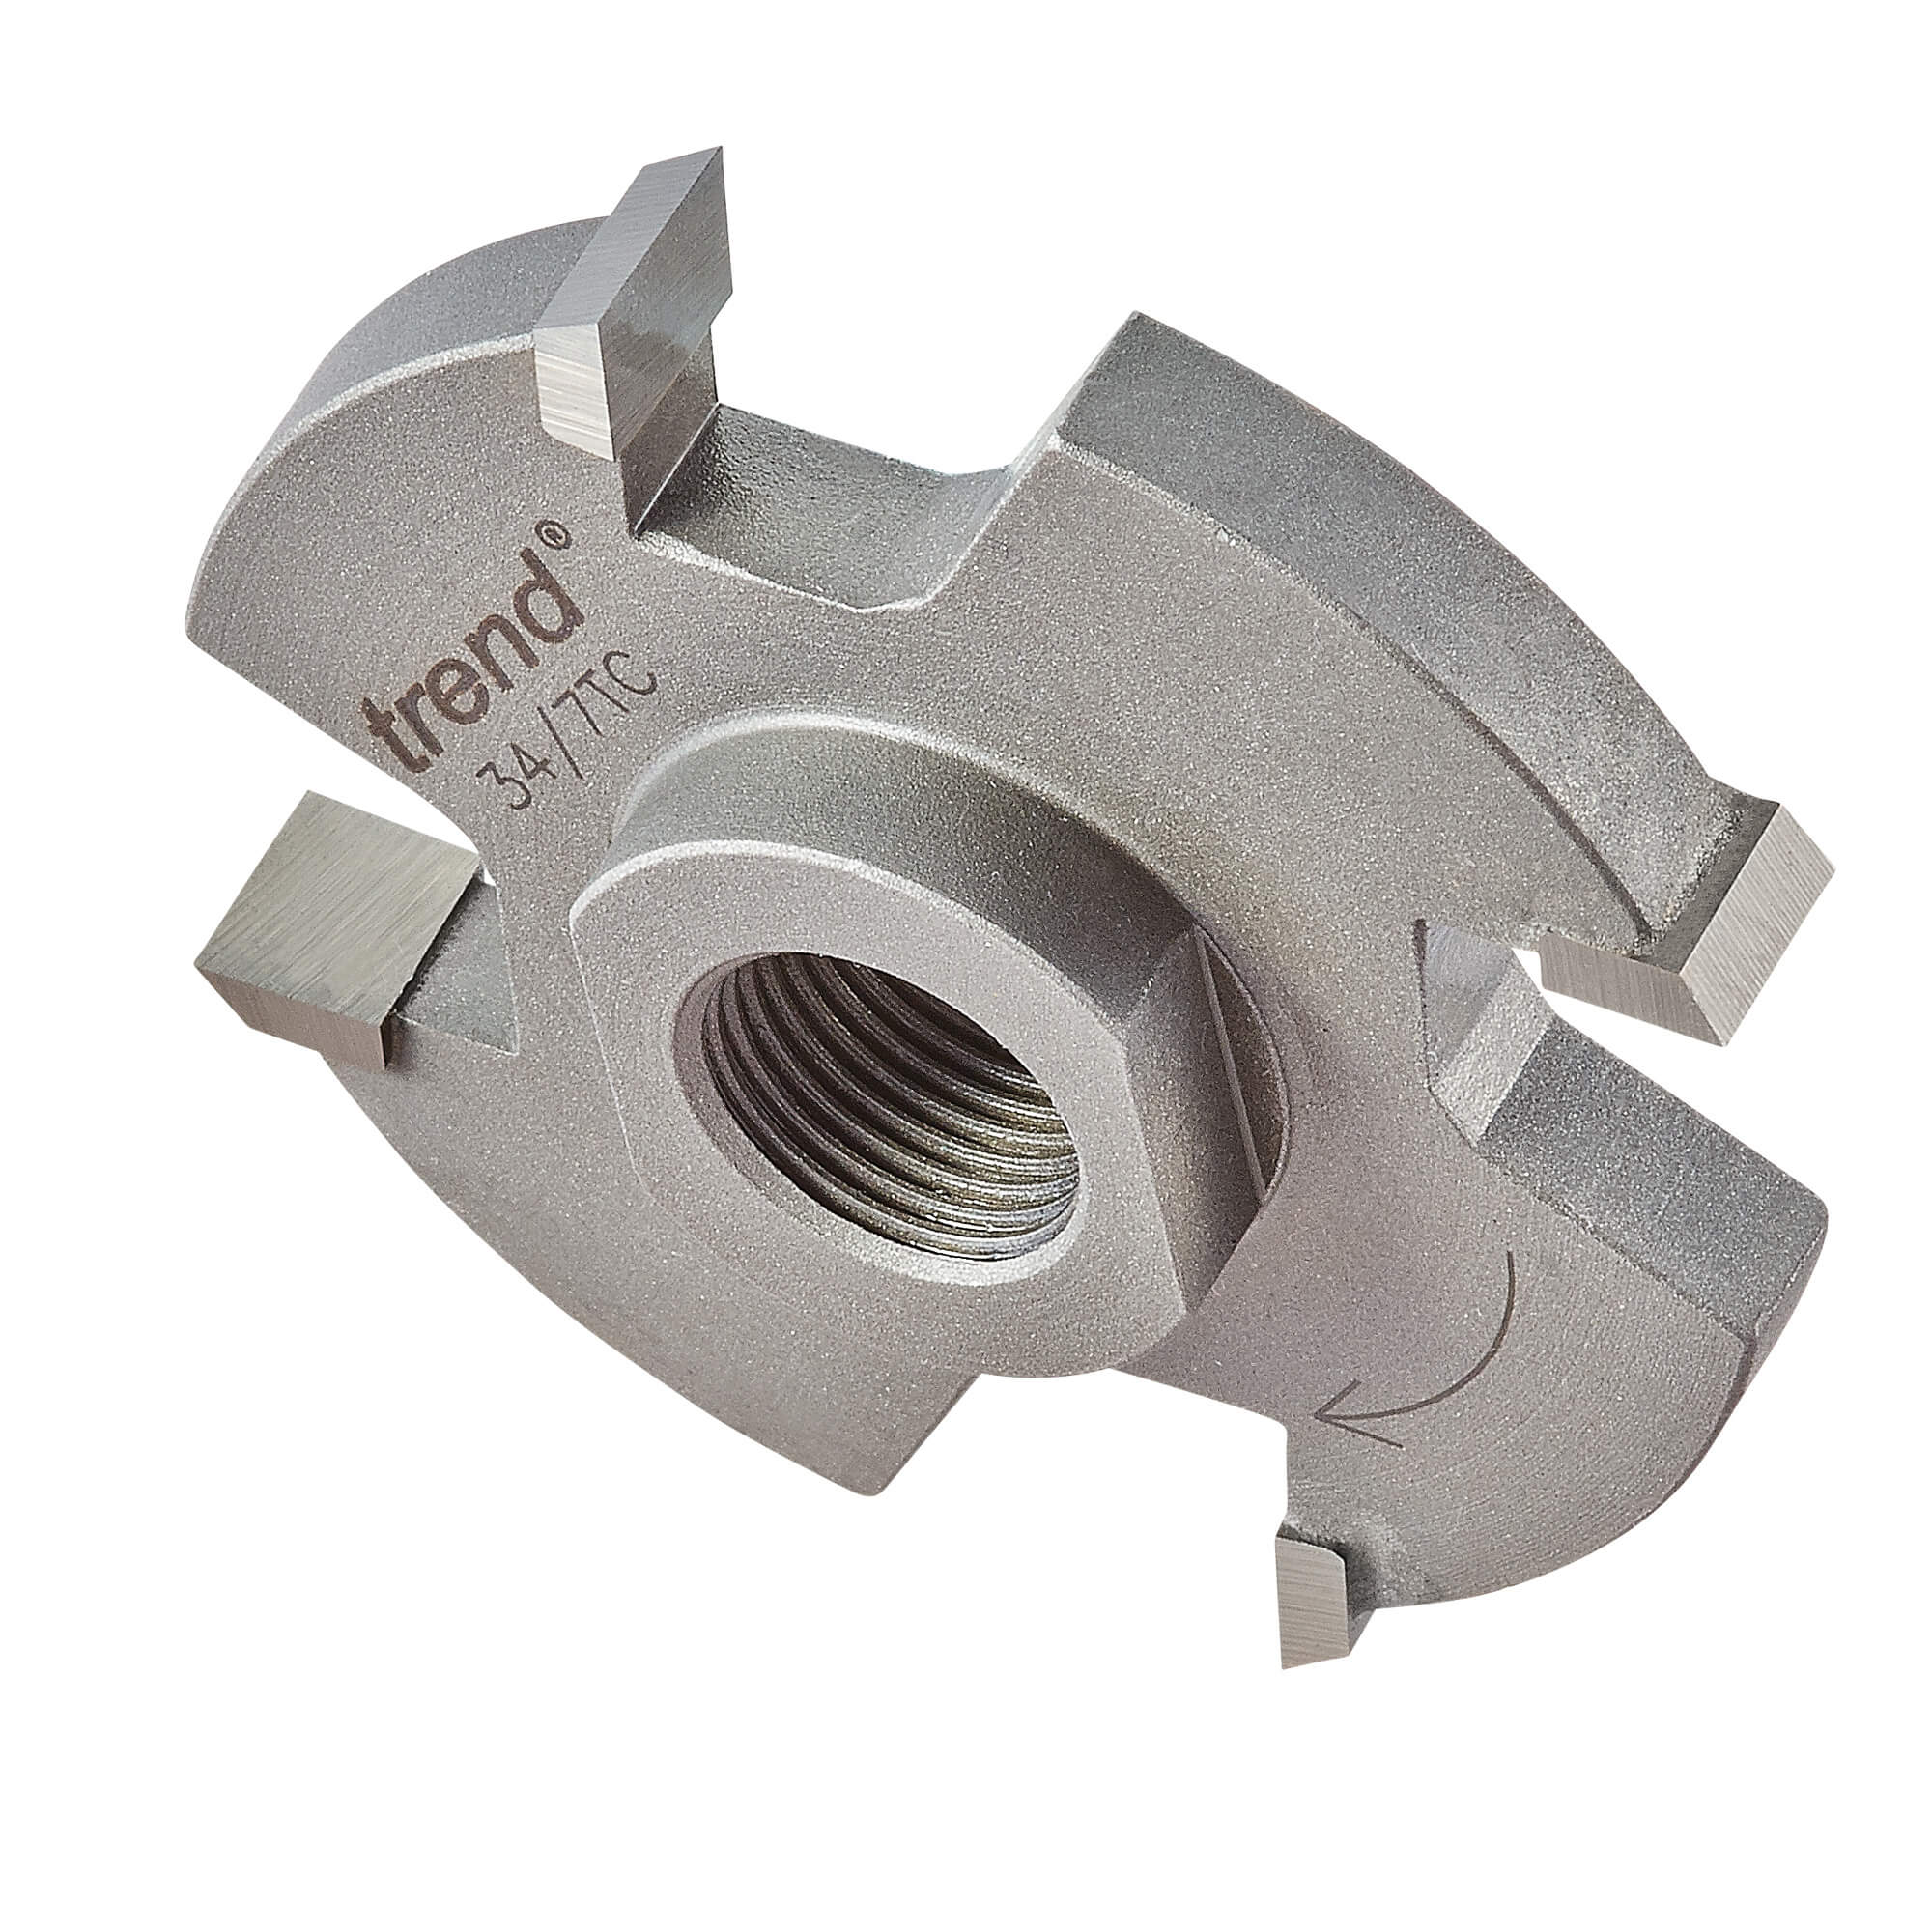 Image of Trend Threaded Slotter Blade for 33 Series M12 Arbors 50mm 7mm M12 Thread